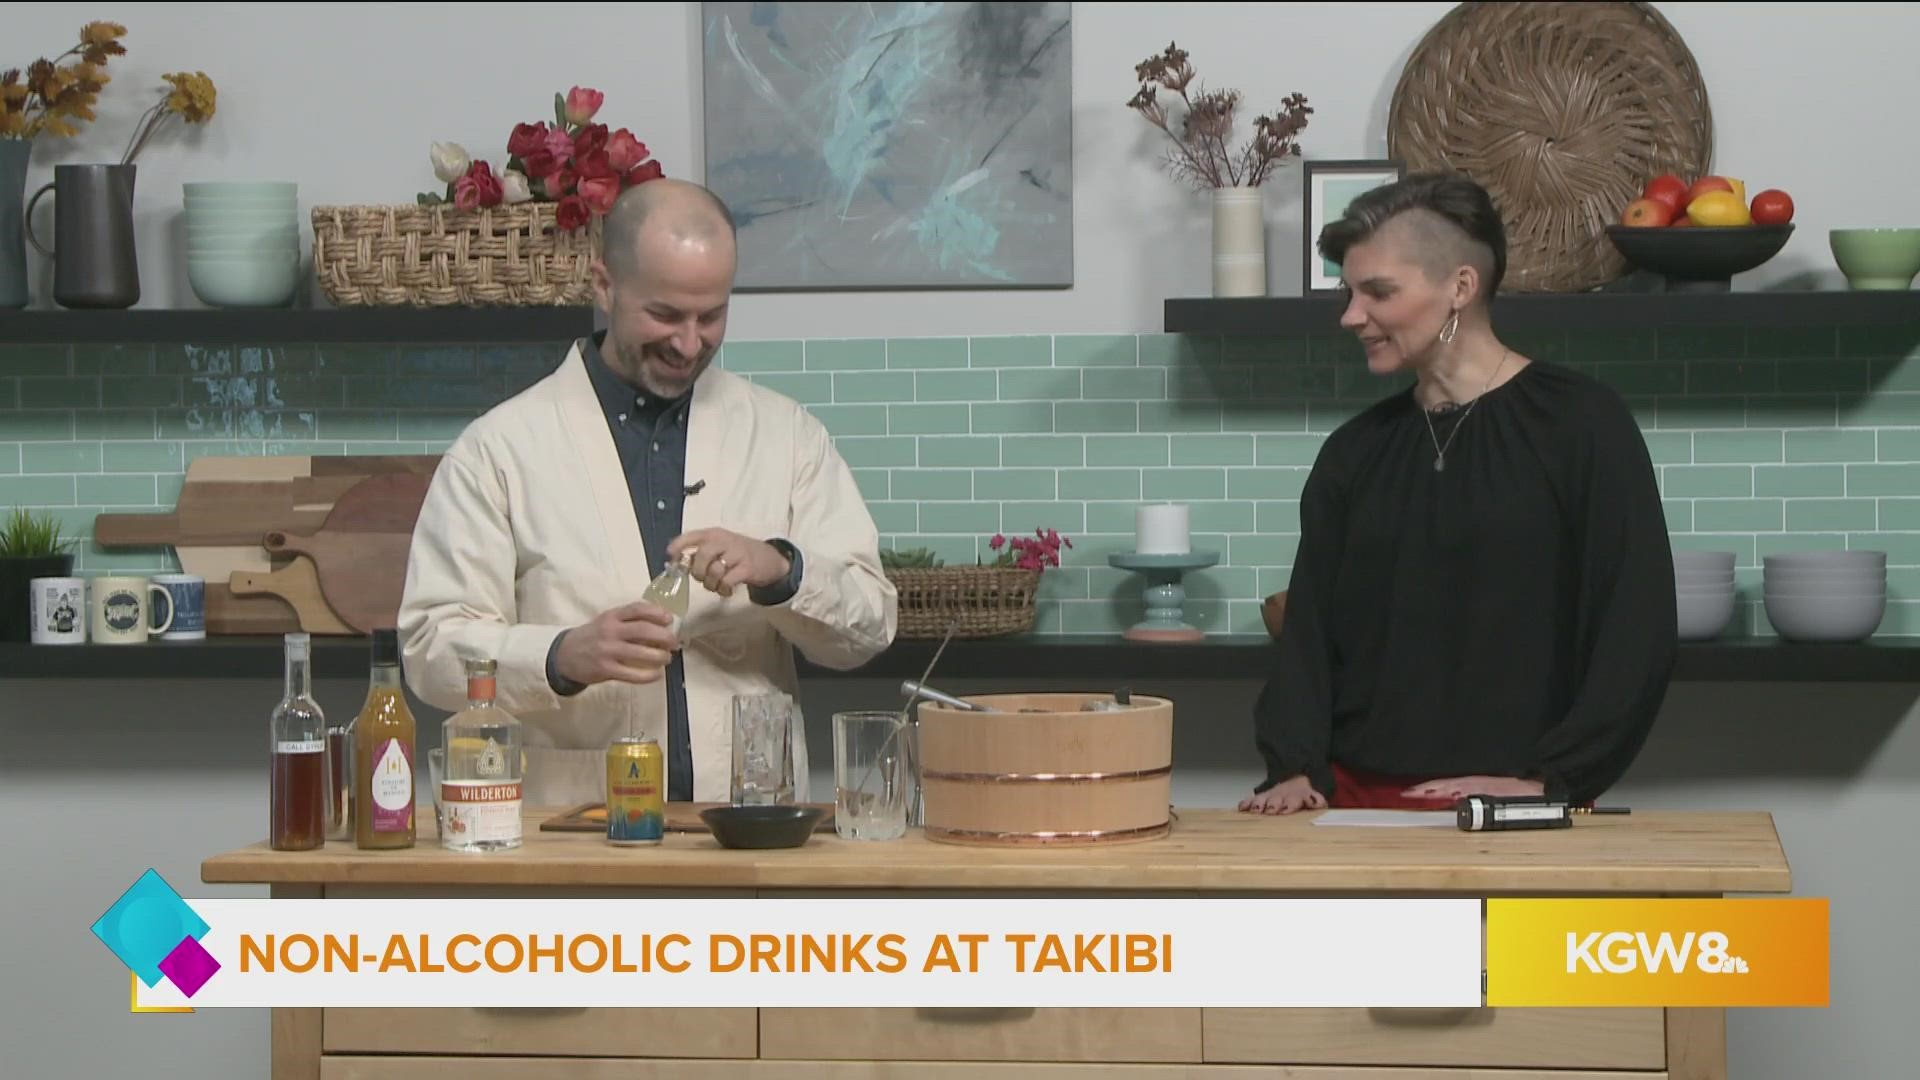 Takibi's Beverage Director, Jim Meehan, mixes up some delicious non-alcoholic drinks.